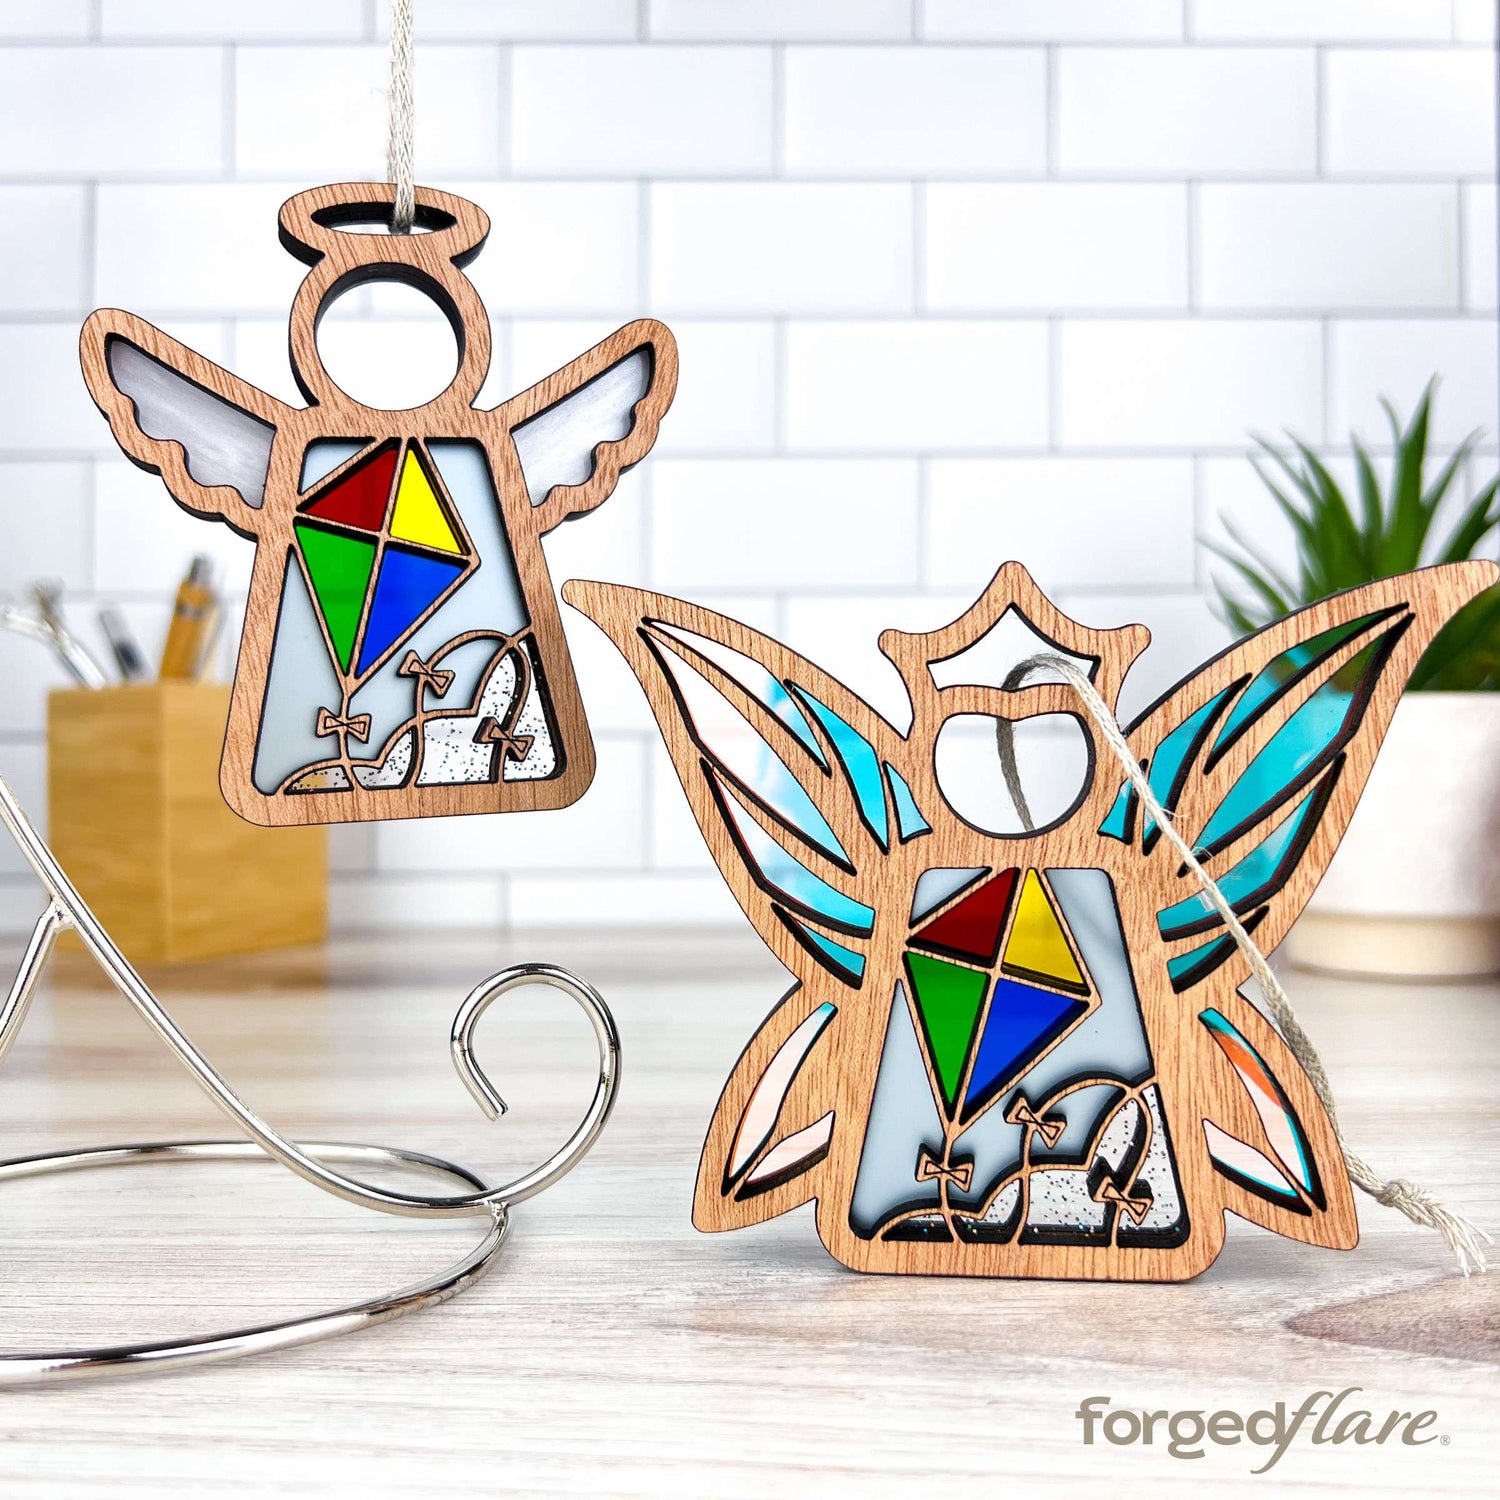 Part of the Fly a Kite for Charity collection, these Mother’s Angels® and fairy ornaments by Forged Flare® feature a colorful kite design. Sales support Youth Villages in Memphis, Tennessee, a nonprofit aiding children, exemplifying the spirit of donating to charity.